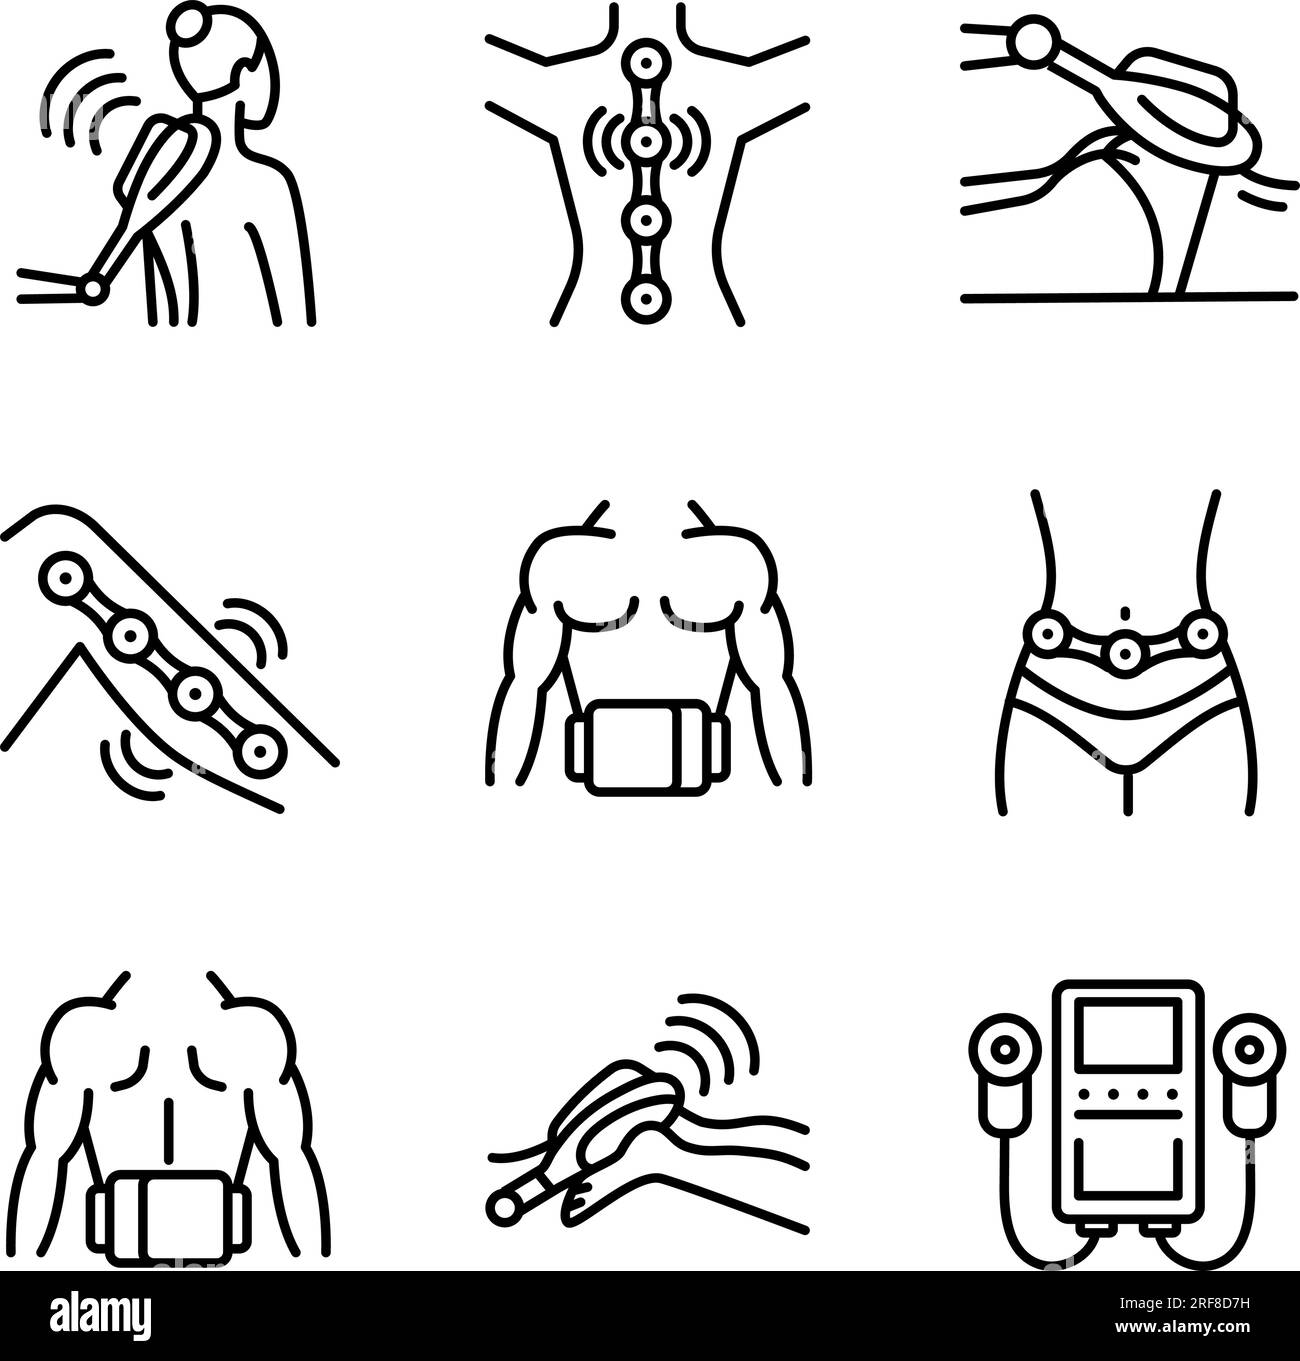 Magnetic therapy thin line icons set. Magnetotherapy. Alternative medicine practice. Rehabilitation. Simple modern vector outline illustrations. Stock Vector